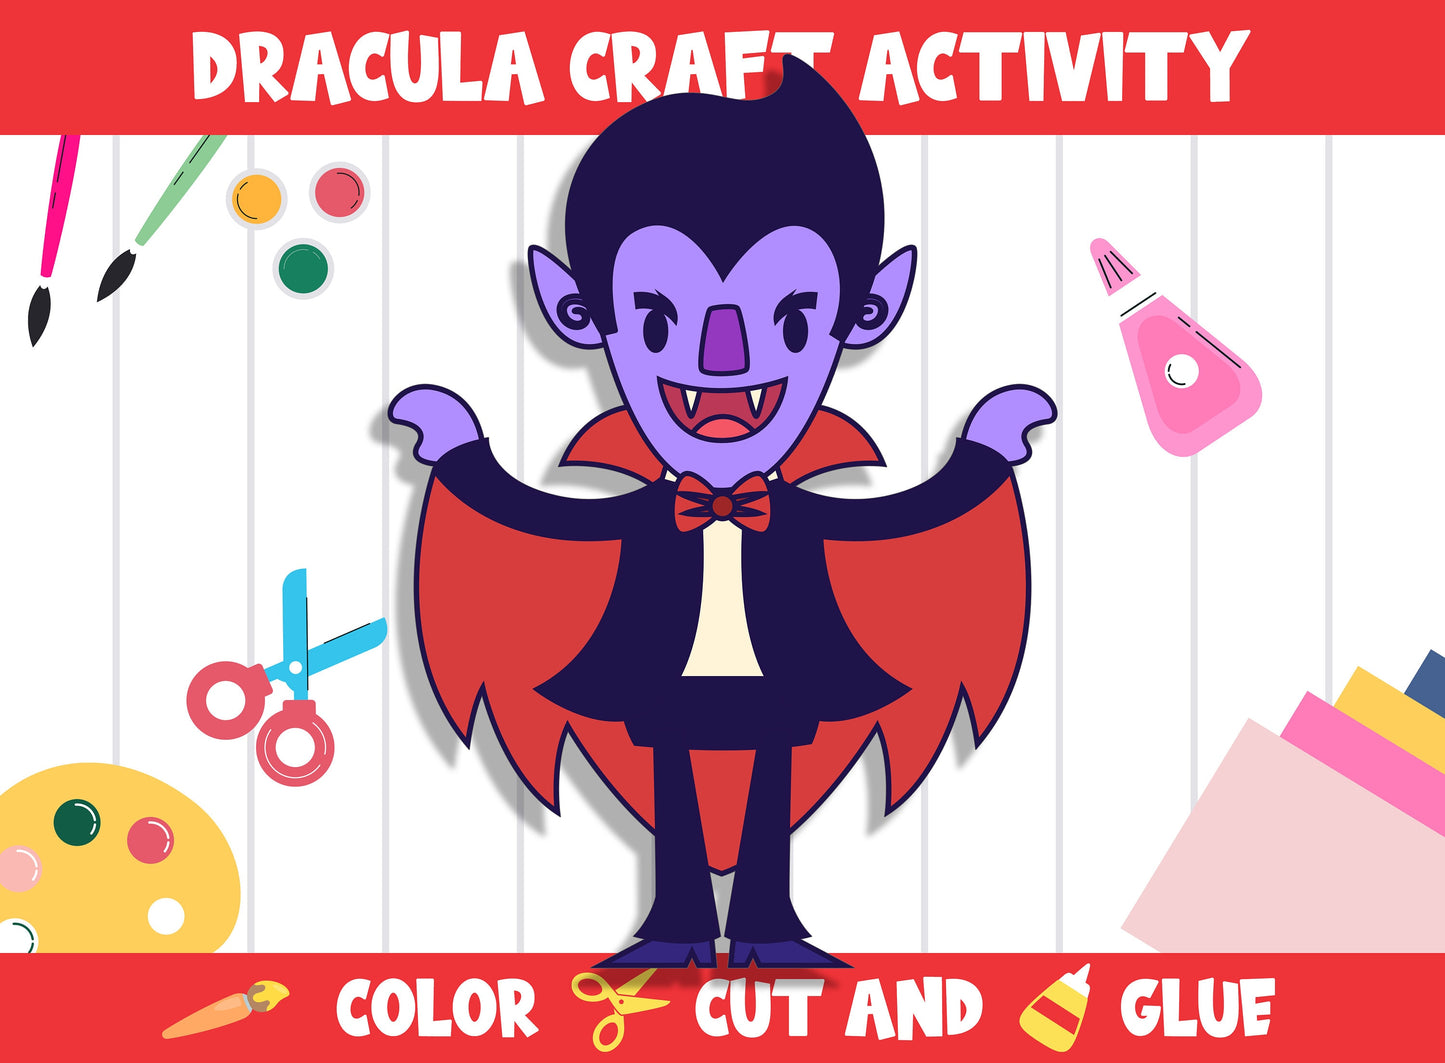 Cute Dracula Craft Activity - Color, Cut, and Glue for PreK to 2nd Grade, PDF File, Instant Download